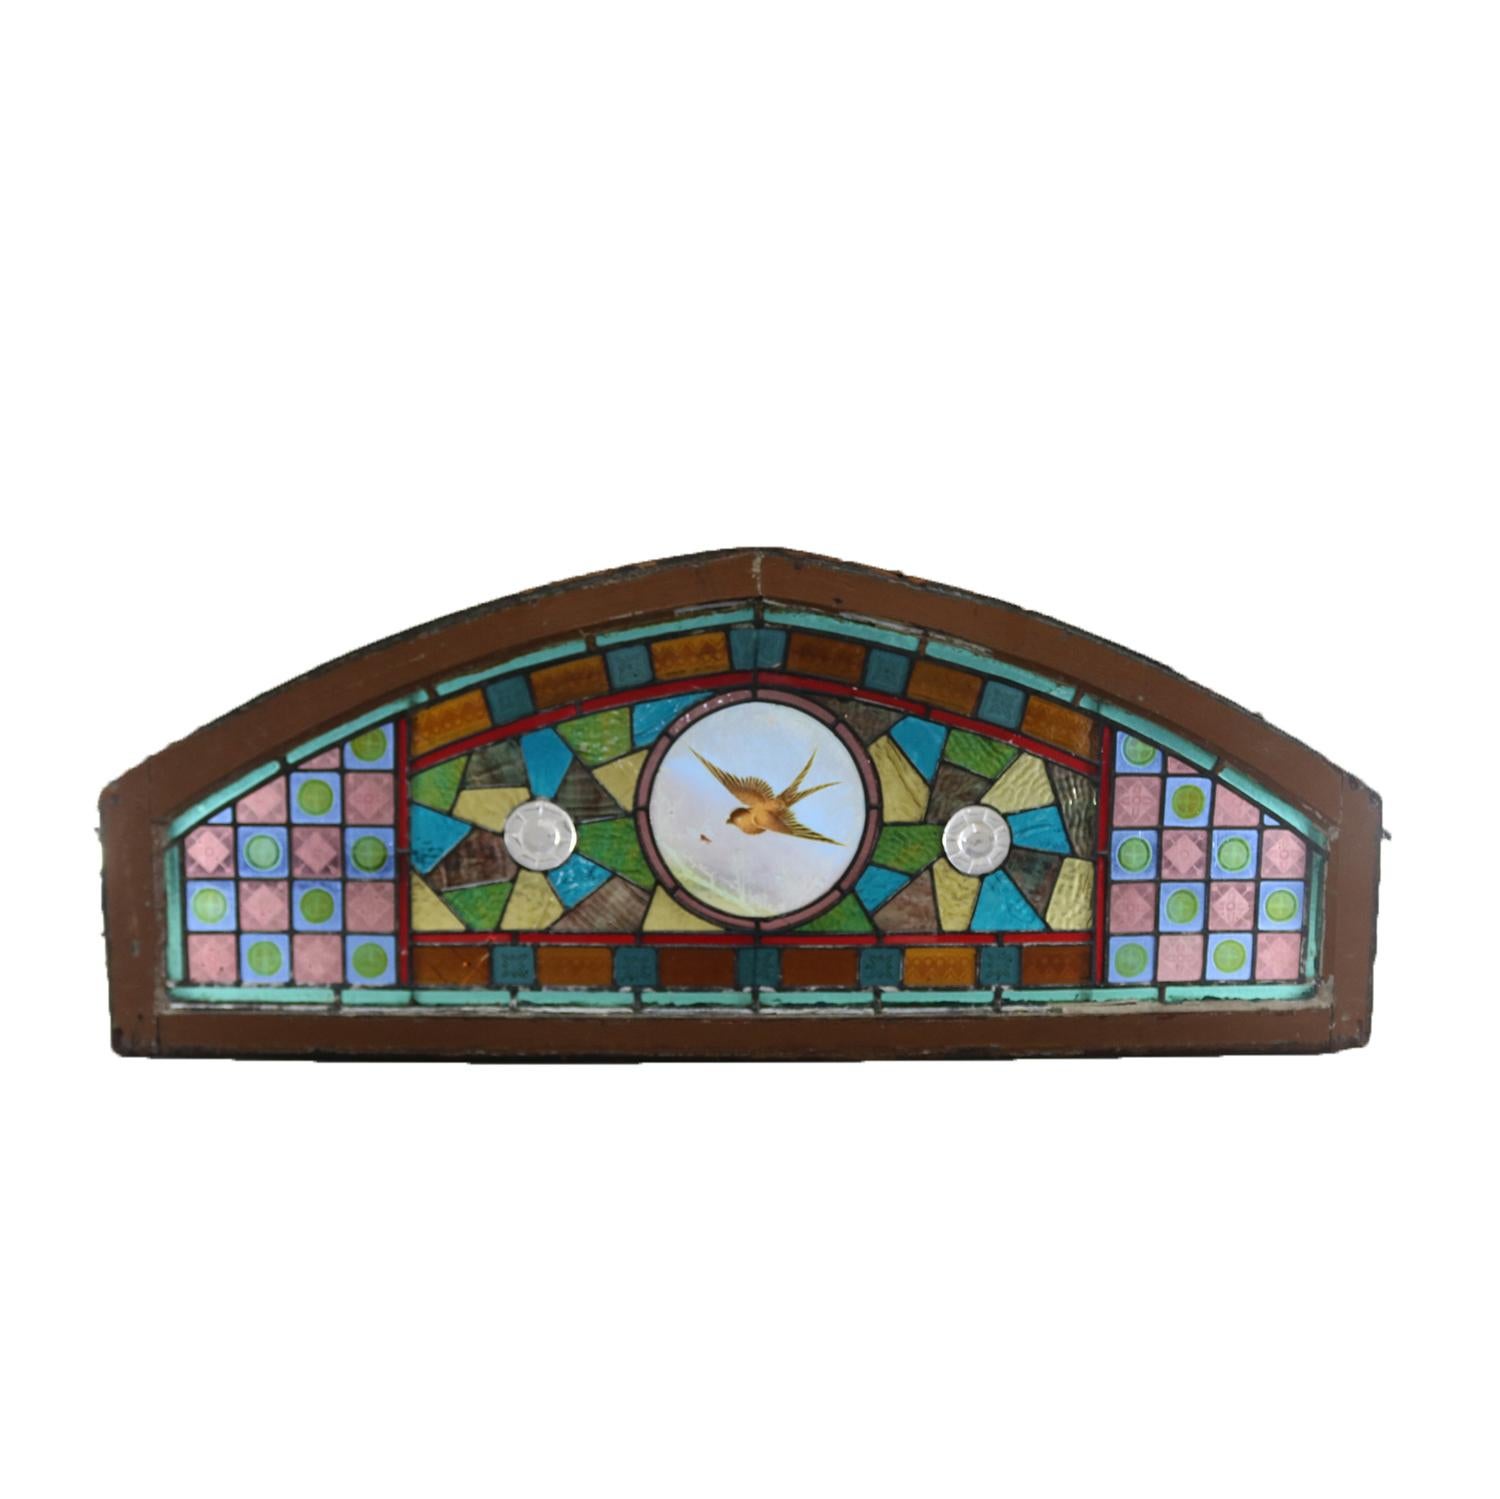 American Antique Aesthetic Movement Leaded and Jeweled Mosaic Stained Glass Window